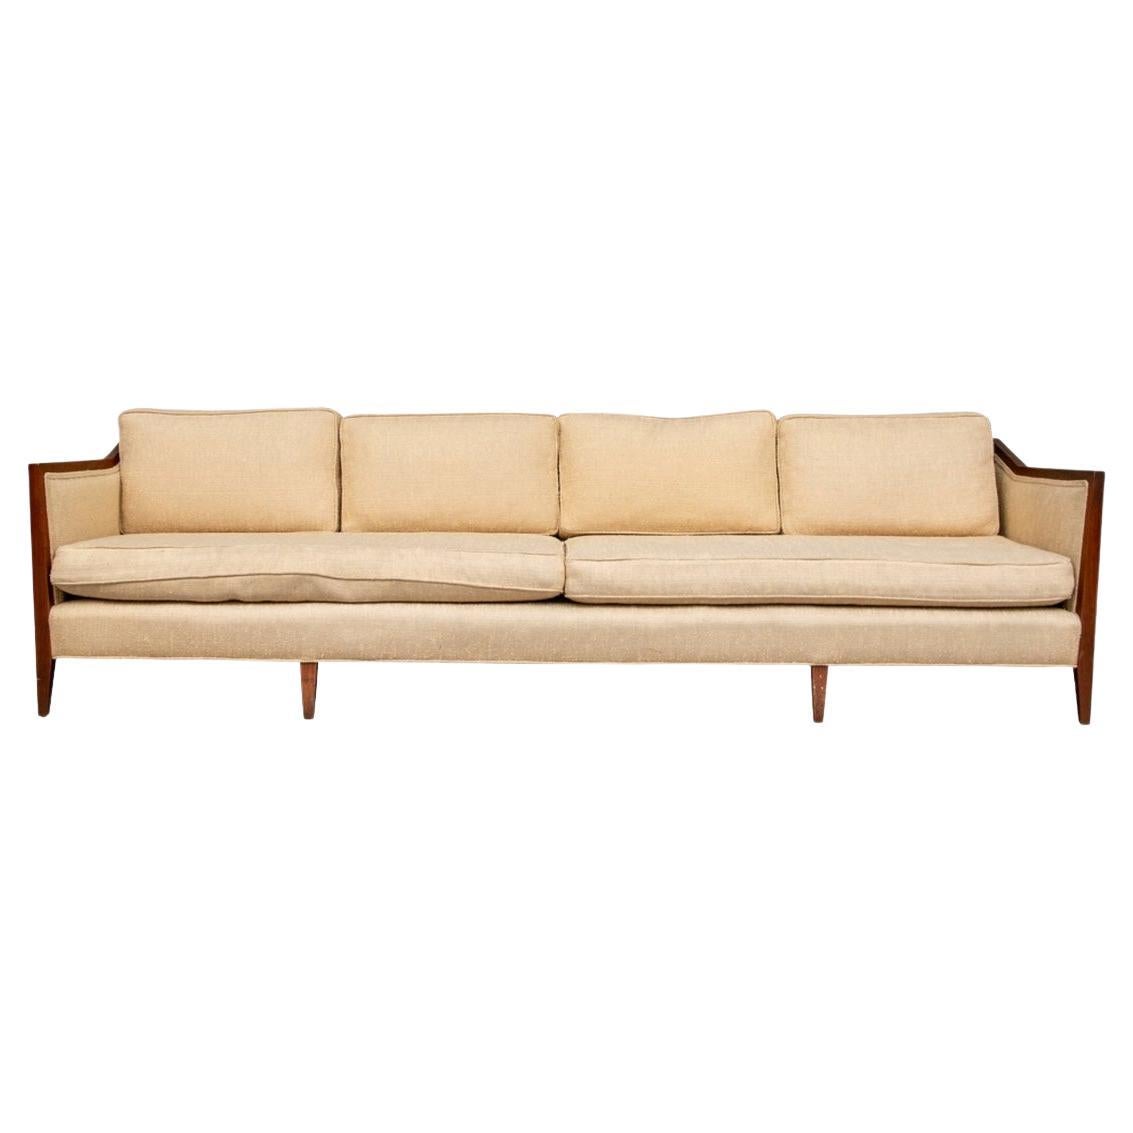 Rare and Exceptional Mid Century Walnut Four Seat Sofa from John Stuart